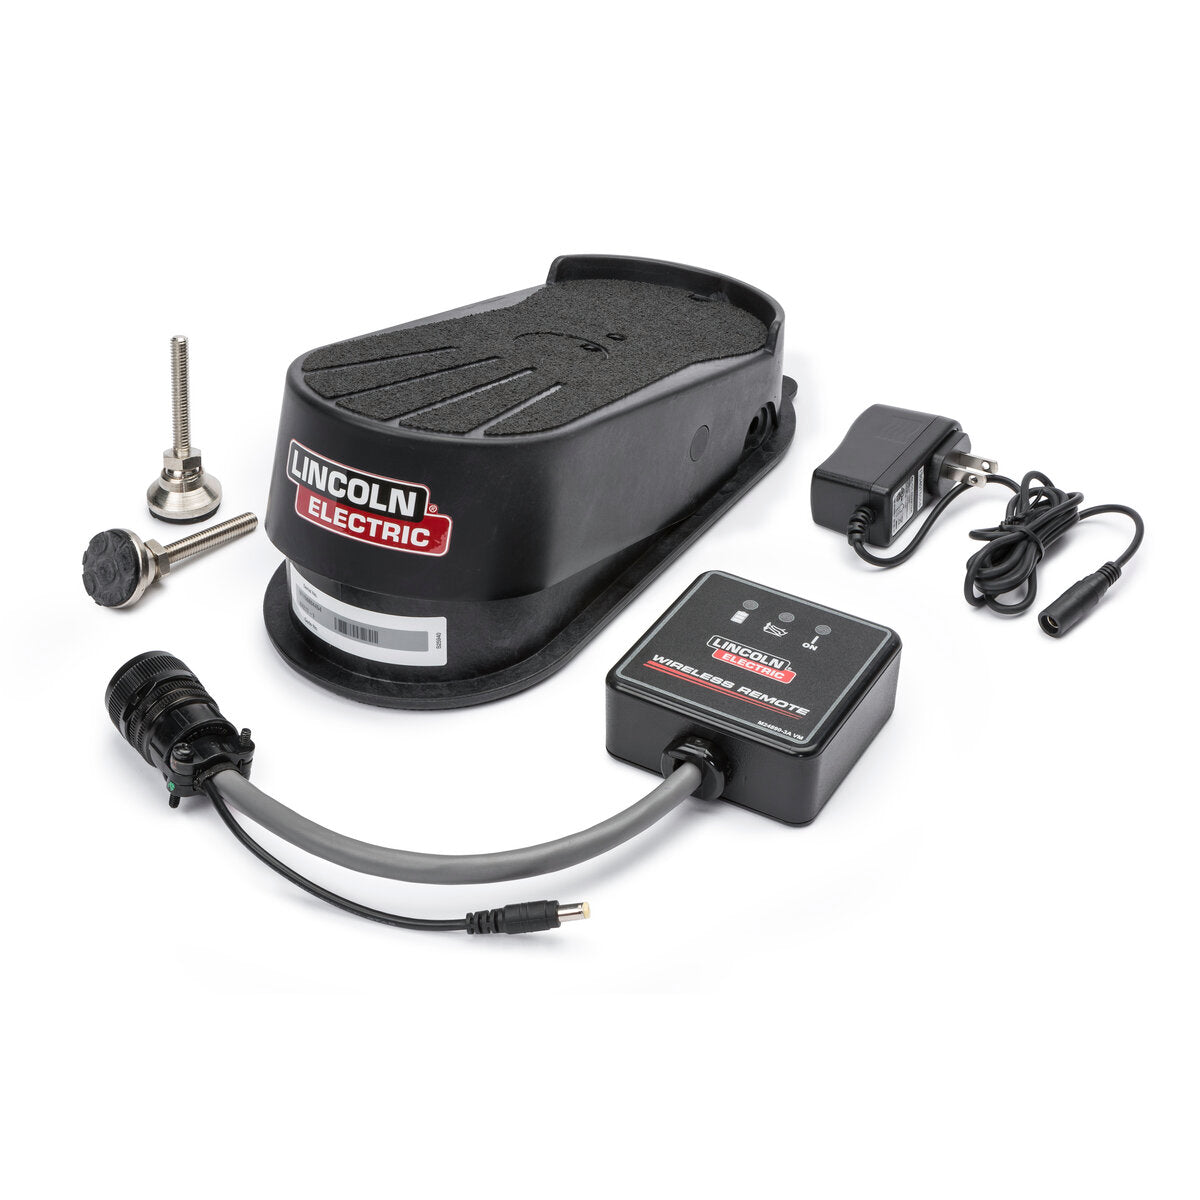 Lincoln Electric - Wireless Foot Pedal for TIG Welding - K4986-1